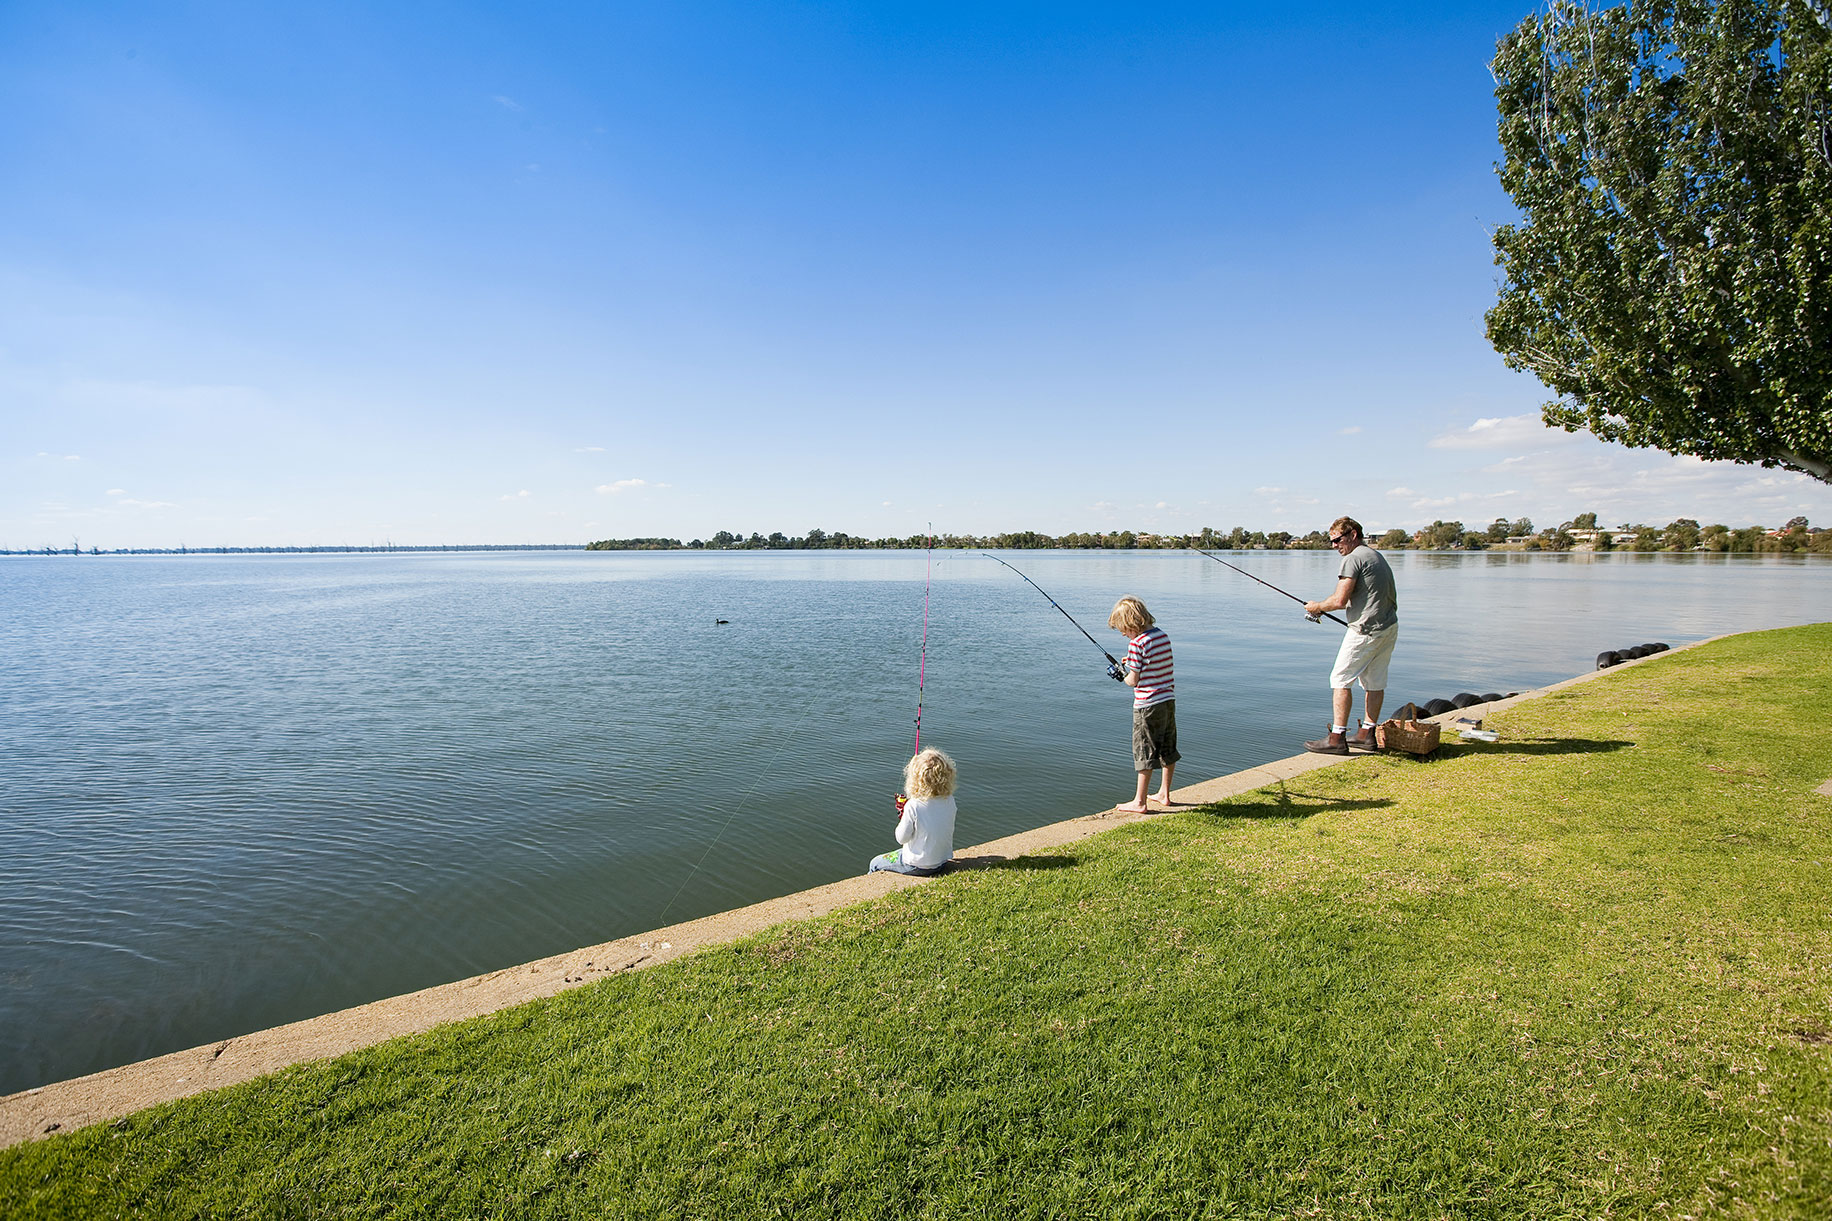 Perfect for families - Lake Mulwala provides fishing, swimming and a rage of water sports activities